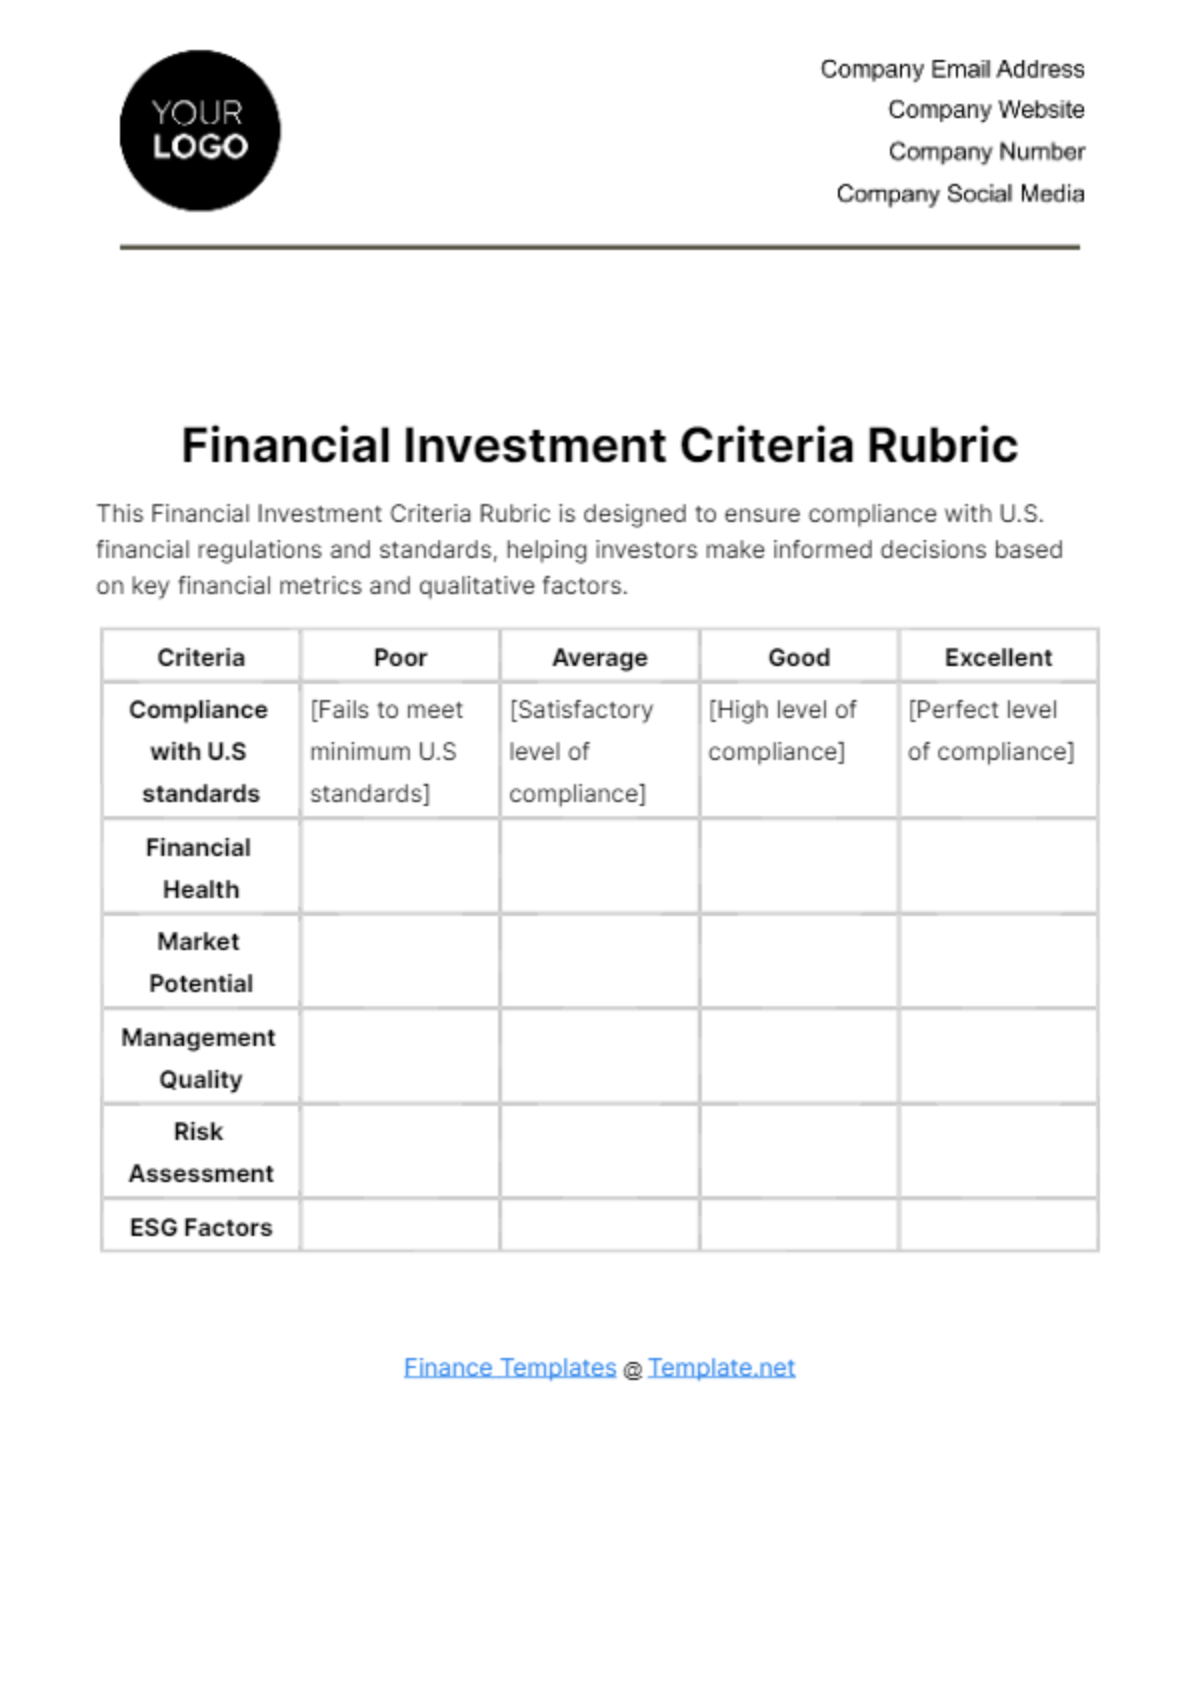 Free Financial Investment Criteria Rubric Template